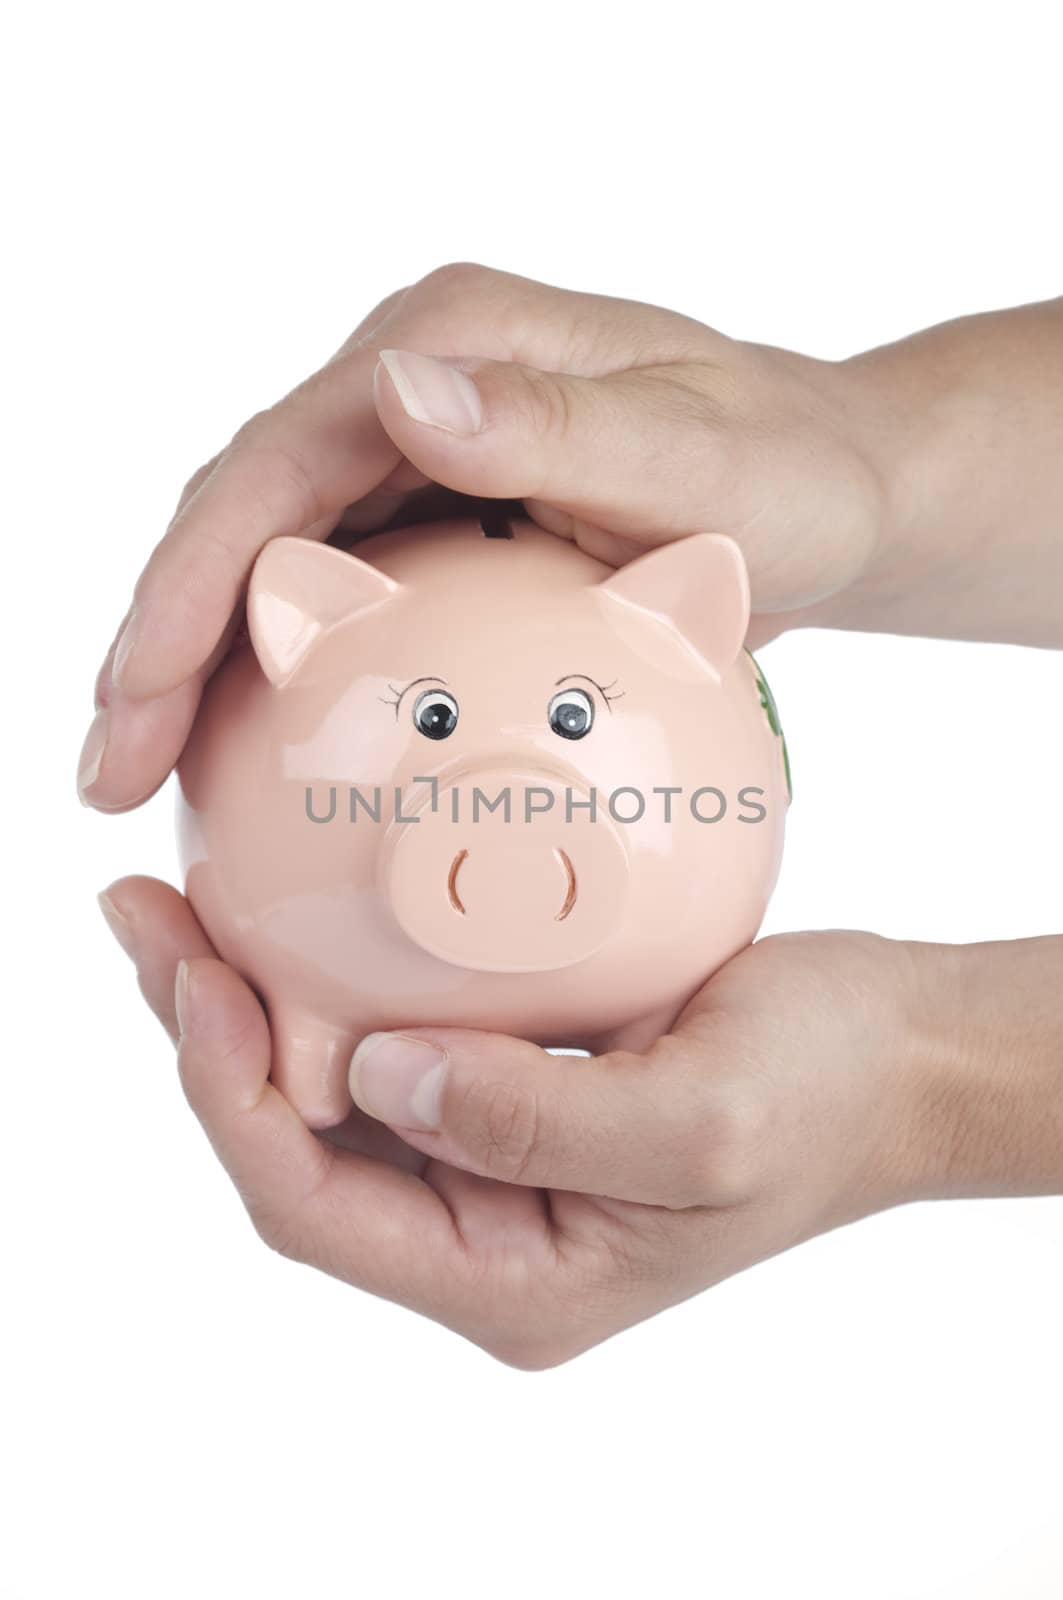 Protecting money in a piggy bank